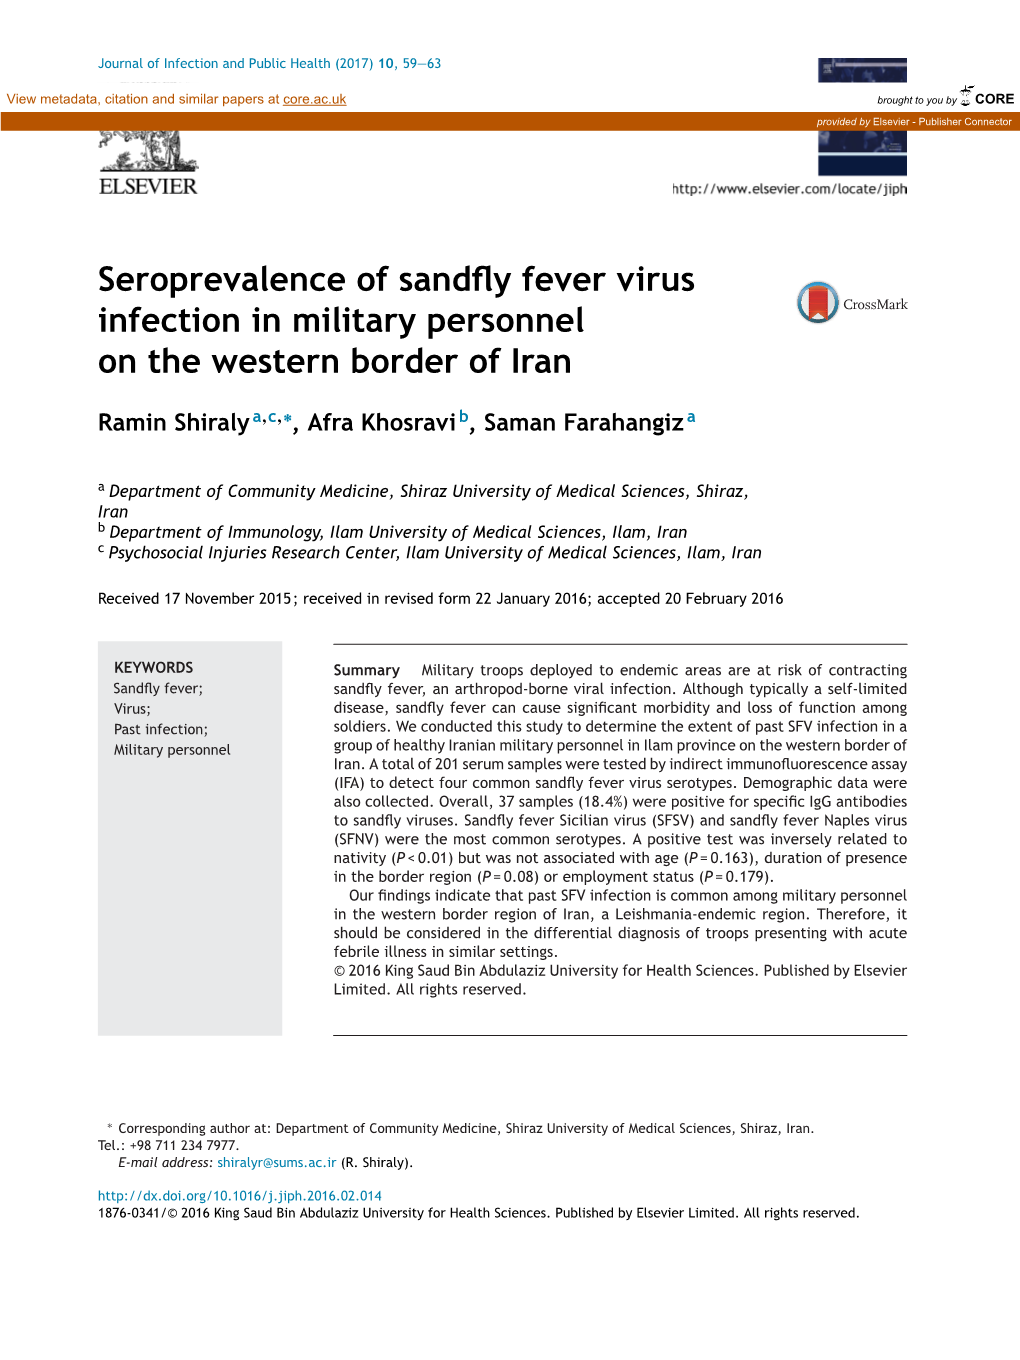 Seroprevalence of Sandfly Fever Virus Infection in Military Personnel On